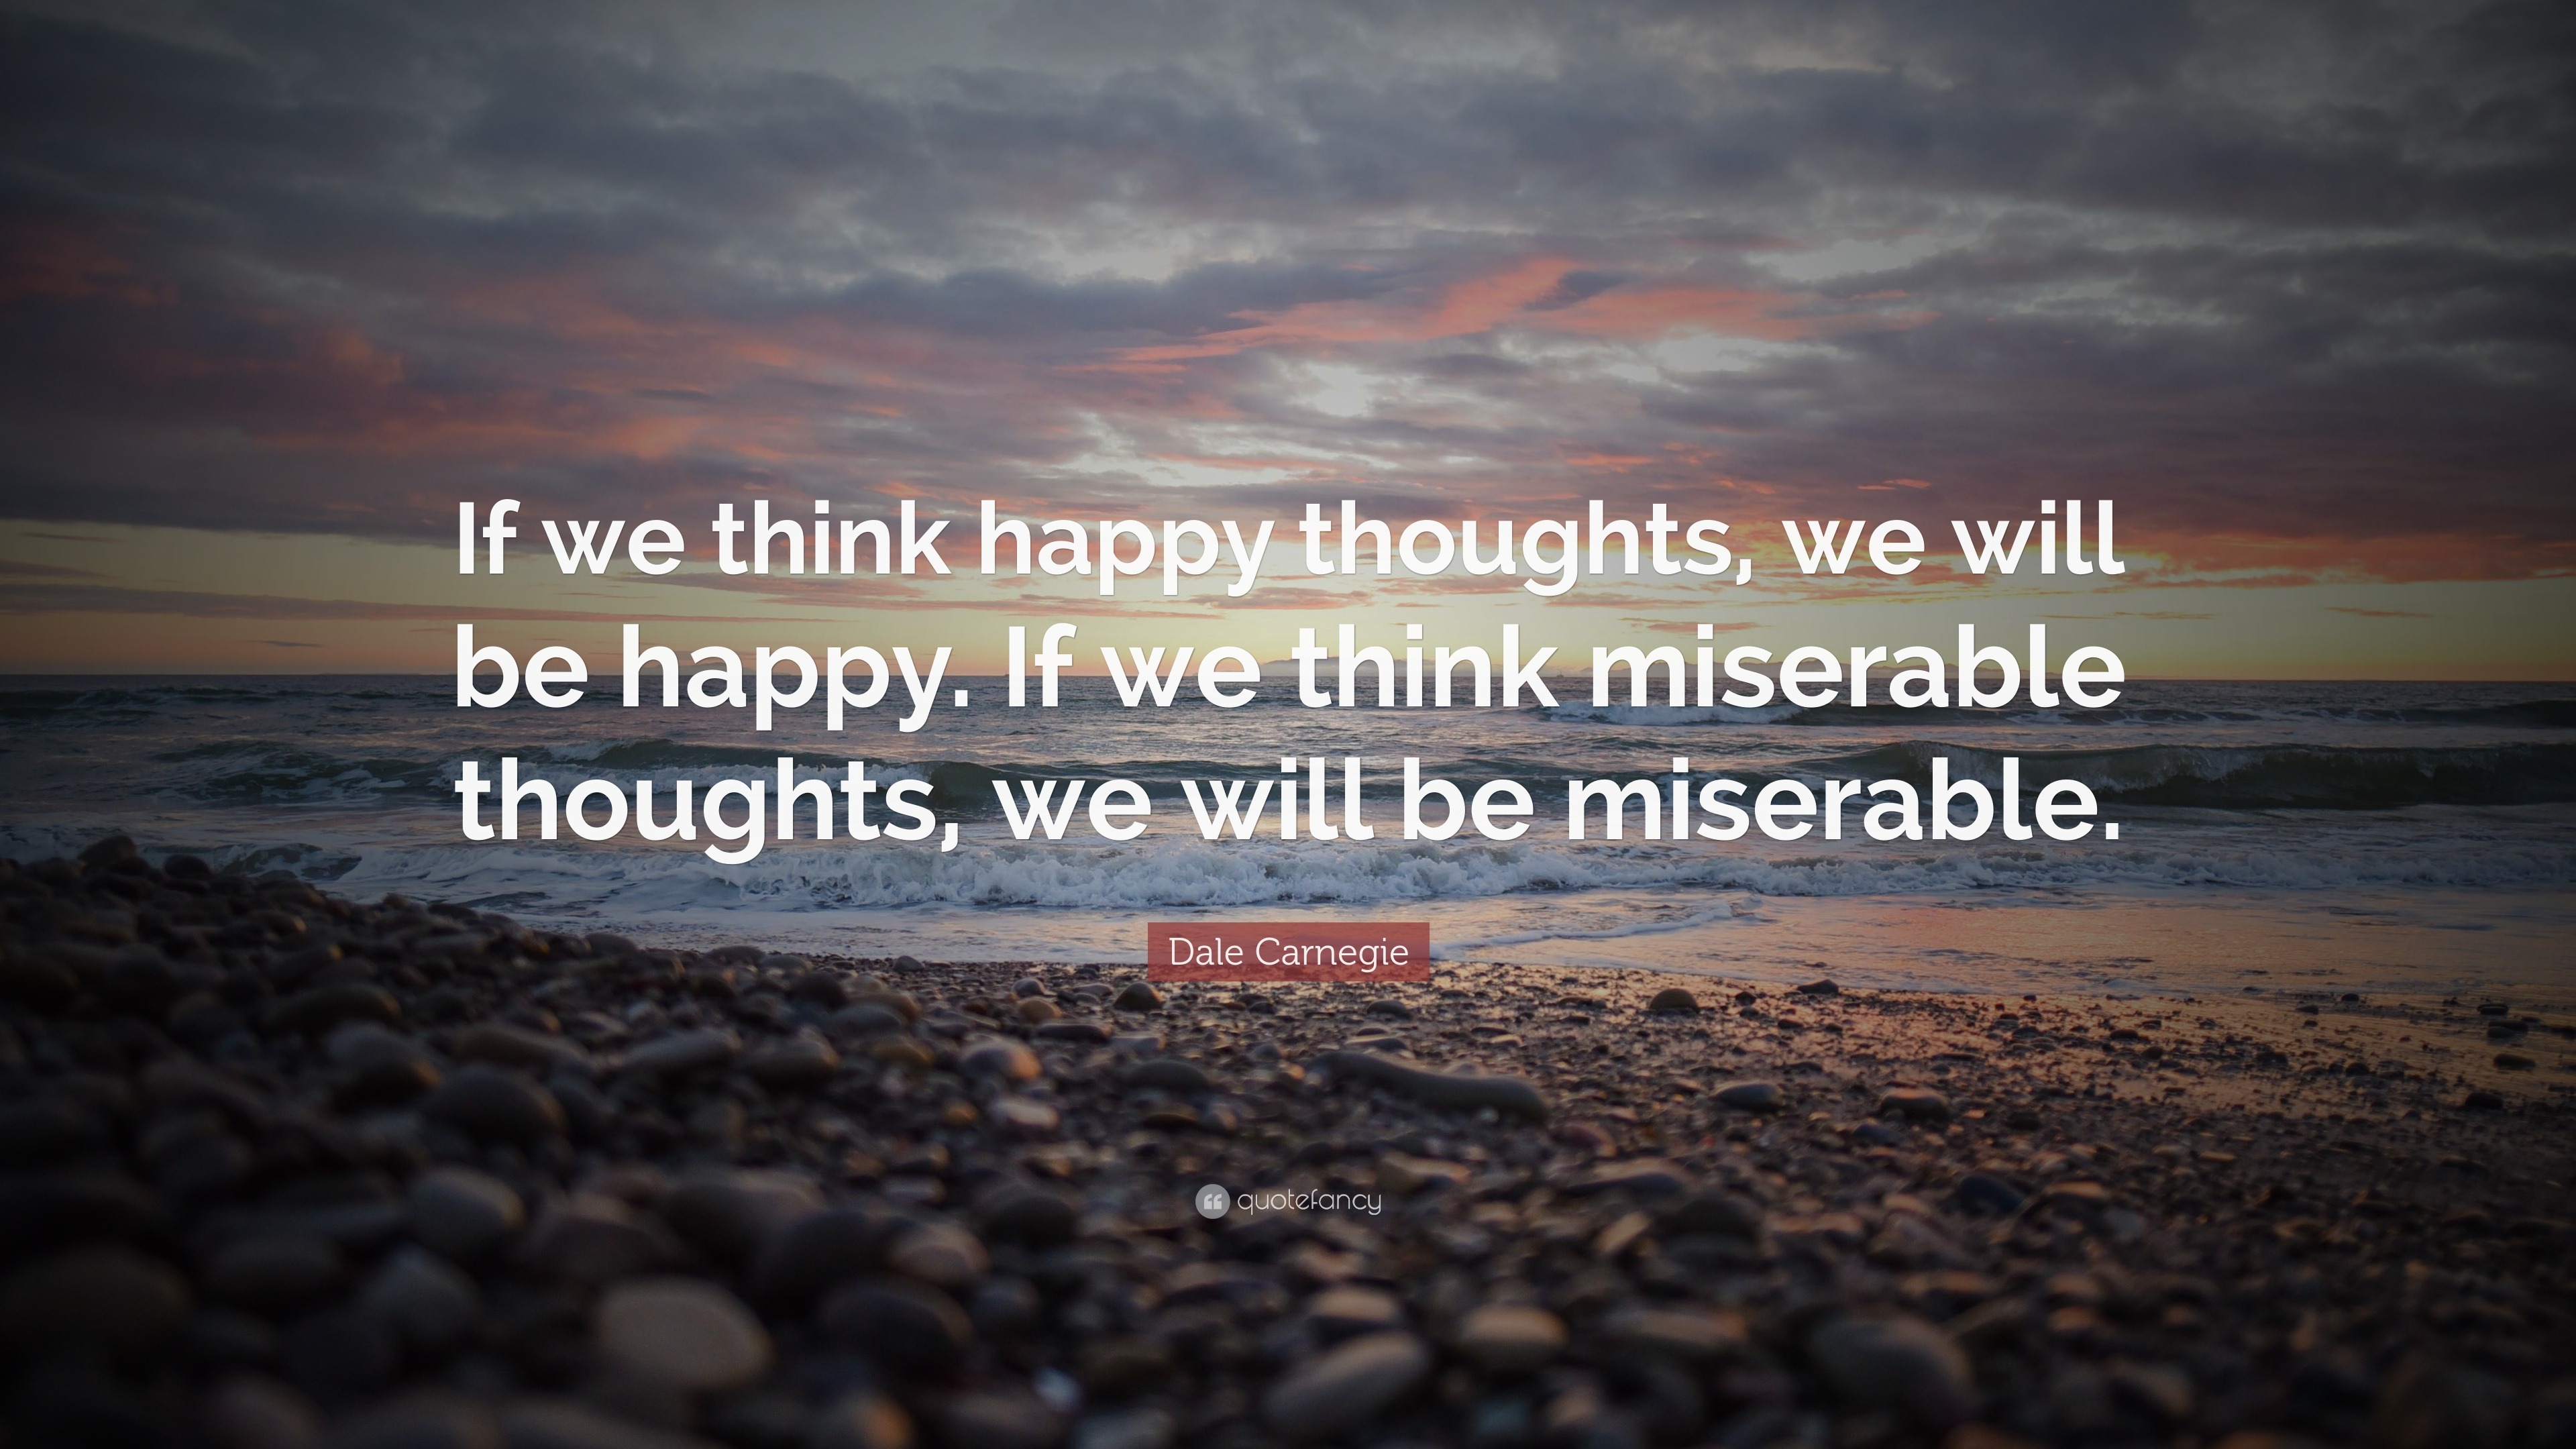 Dale Carnegie Quote “If we think happy thoughts, we will